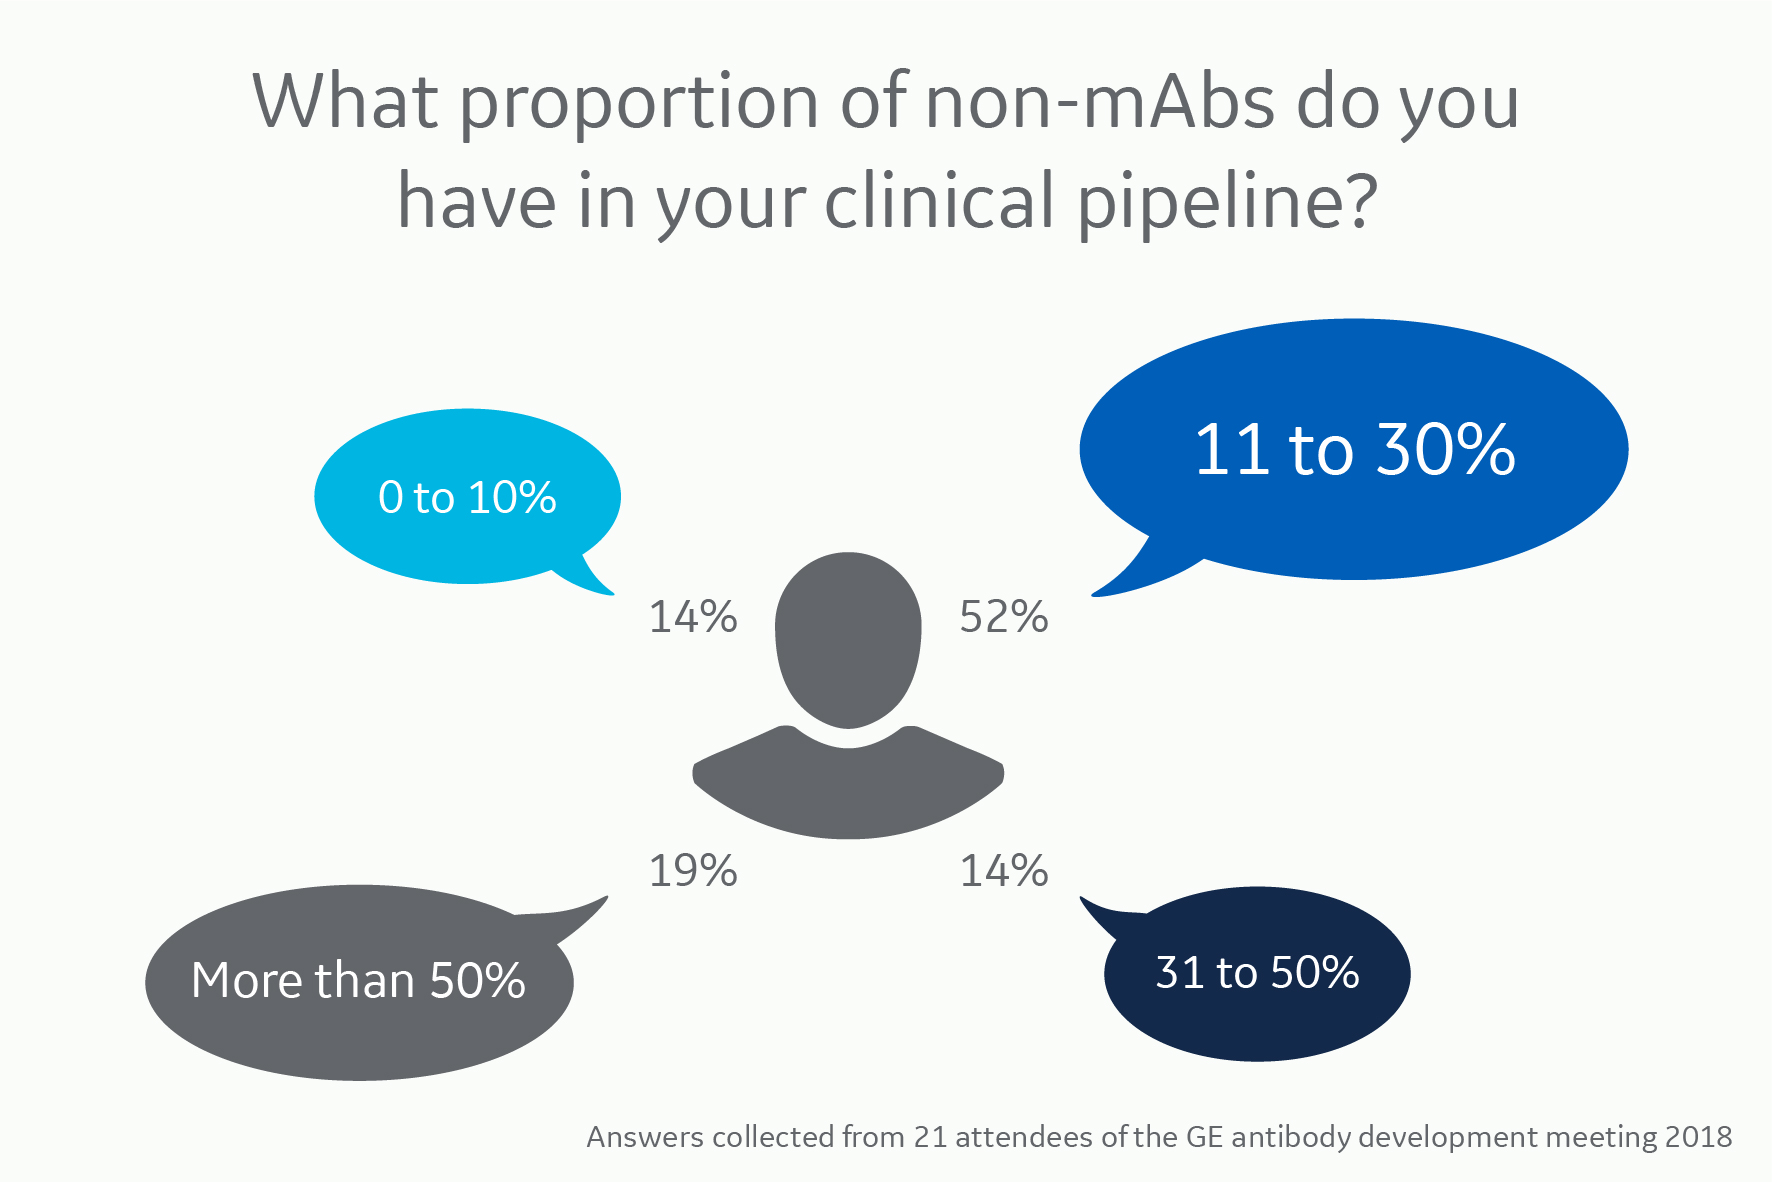 Survey results for how many non-monoclonal antibodies, like bispecific antibodies, downstream process developers have in the pipeline